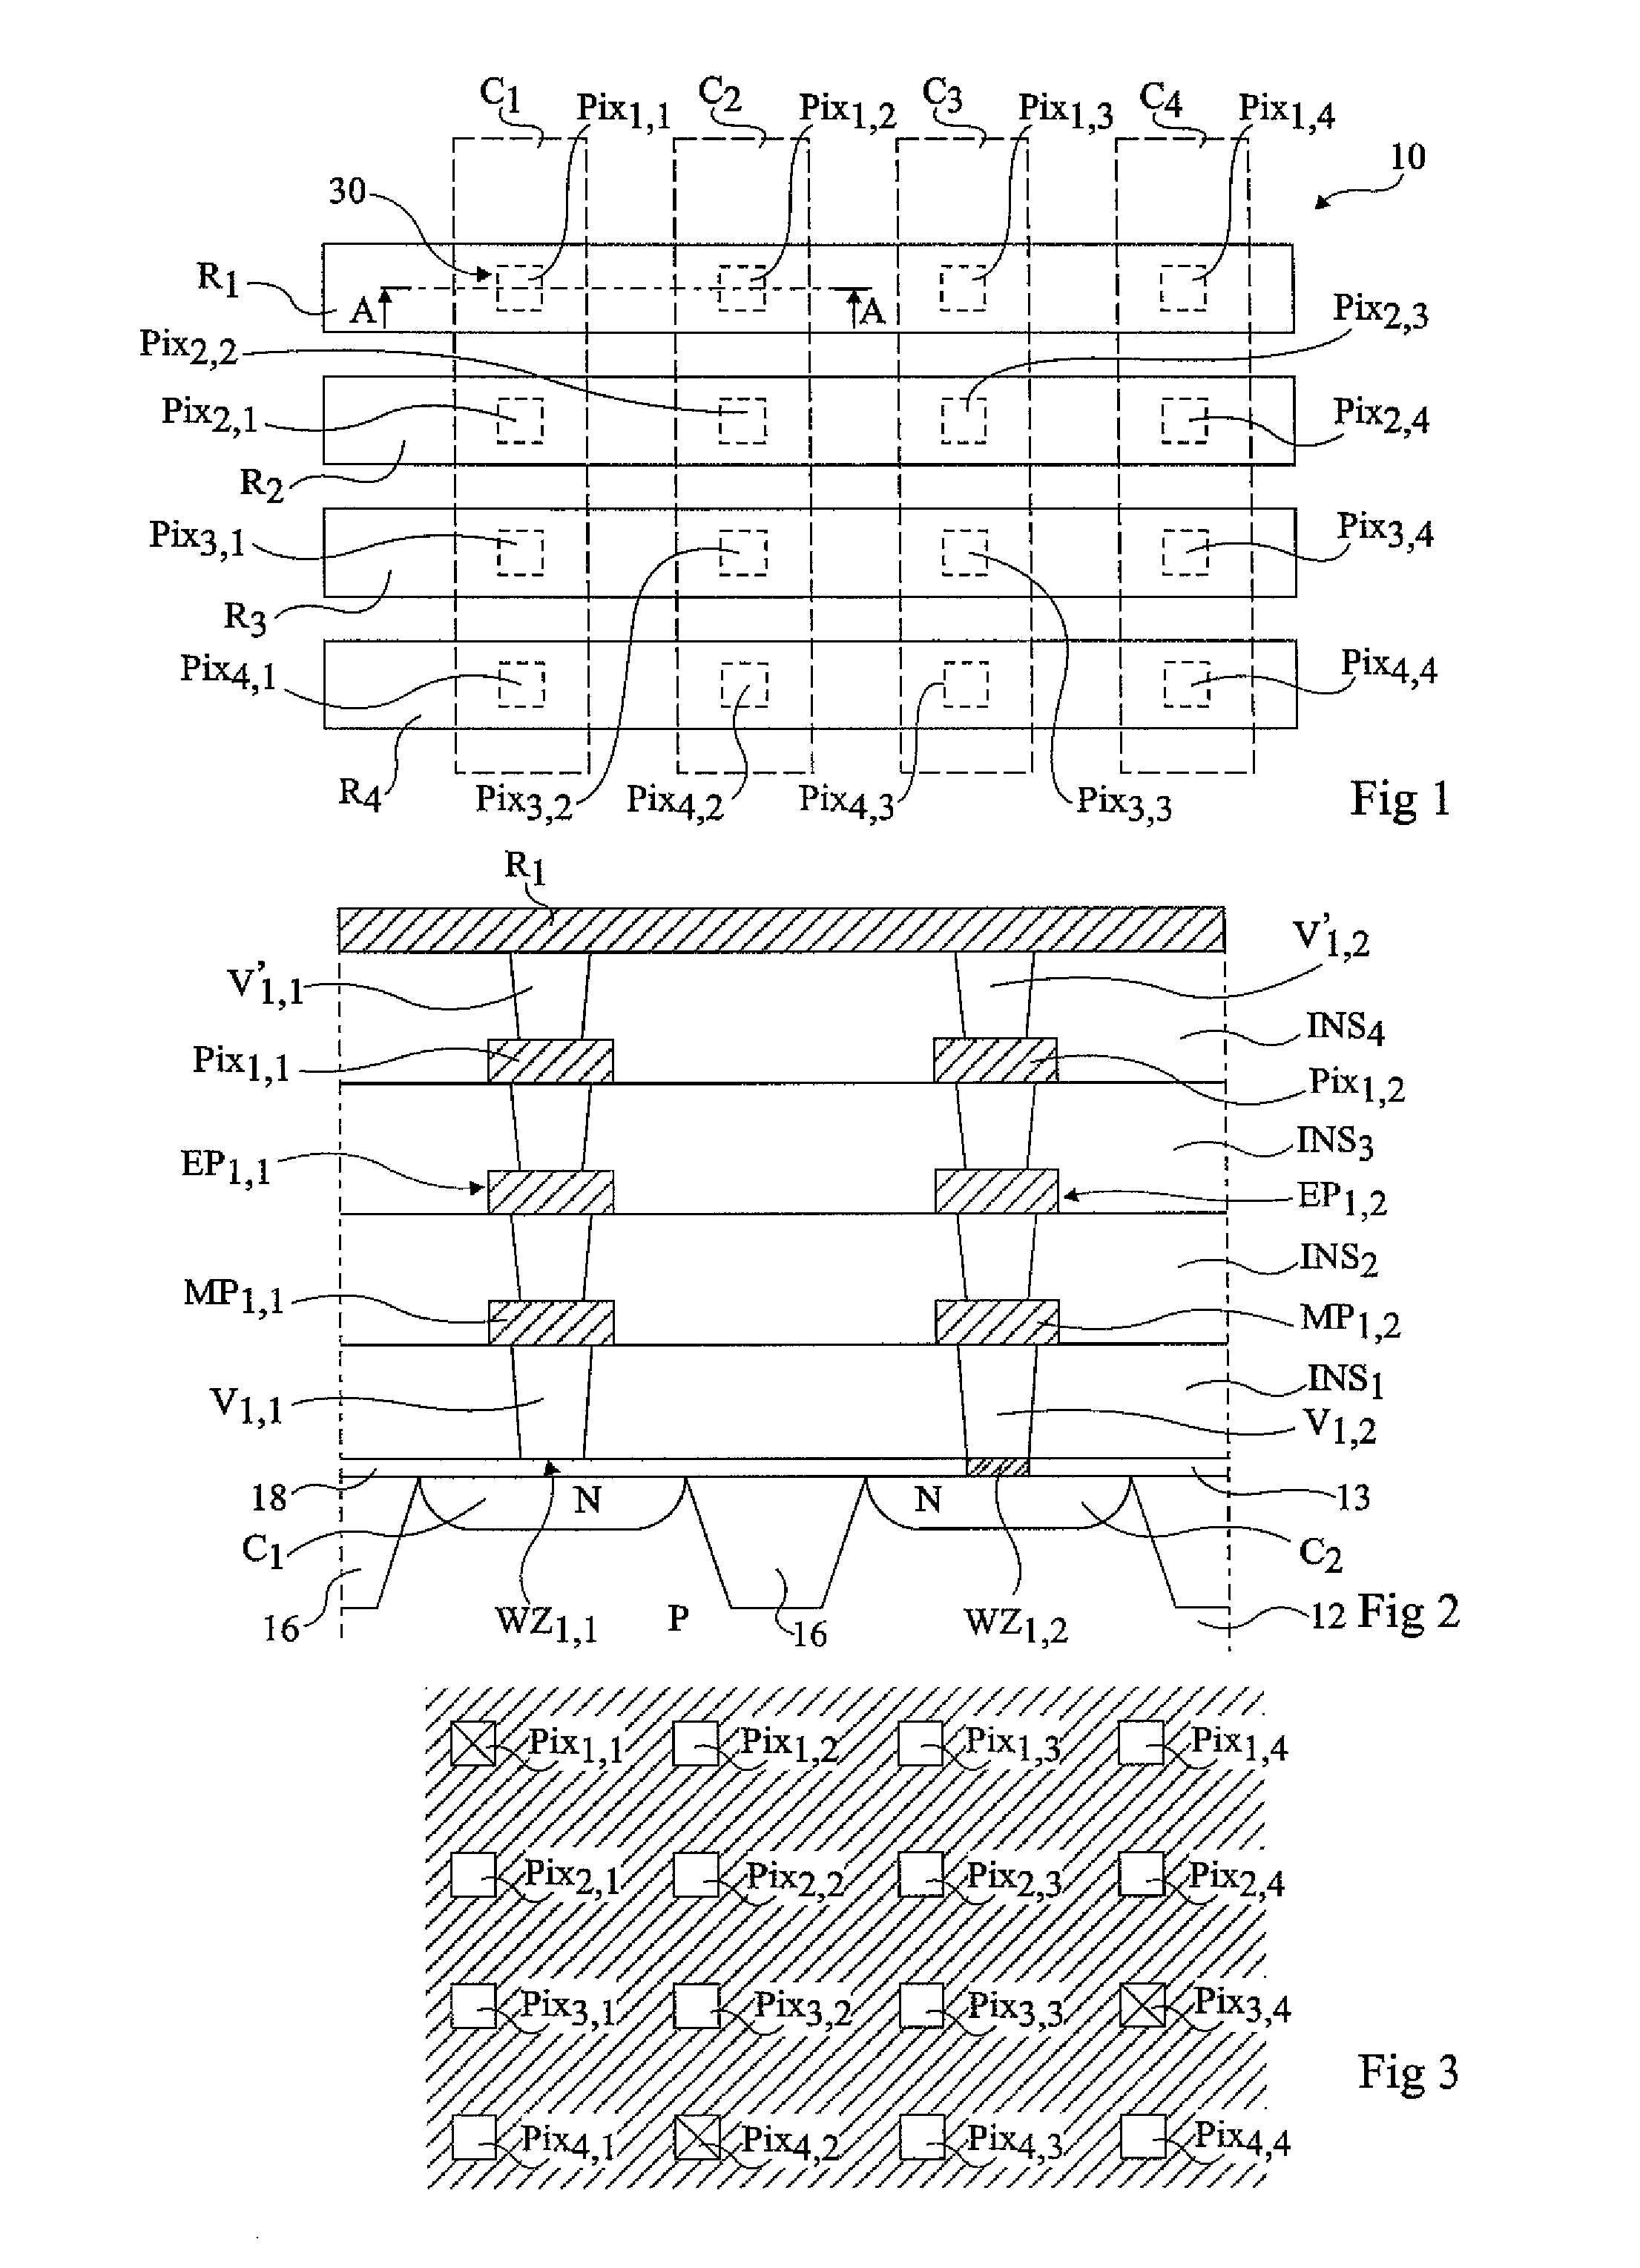 Storage of an image in an integrated circuit